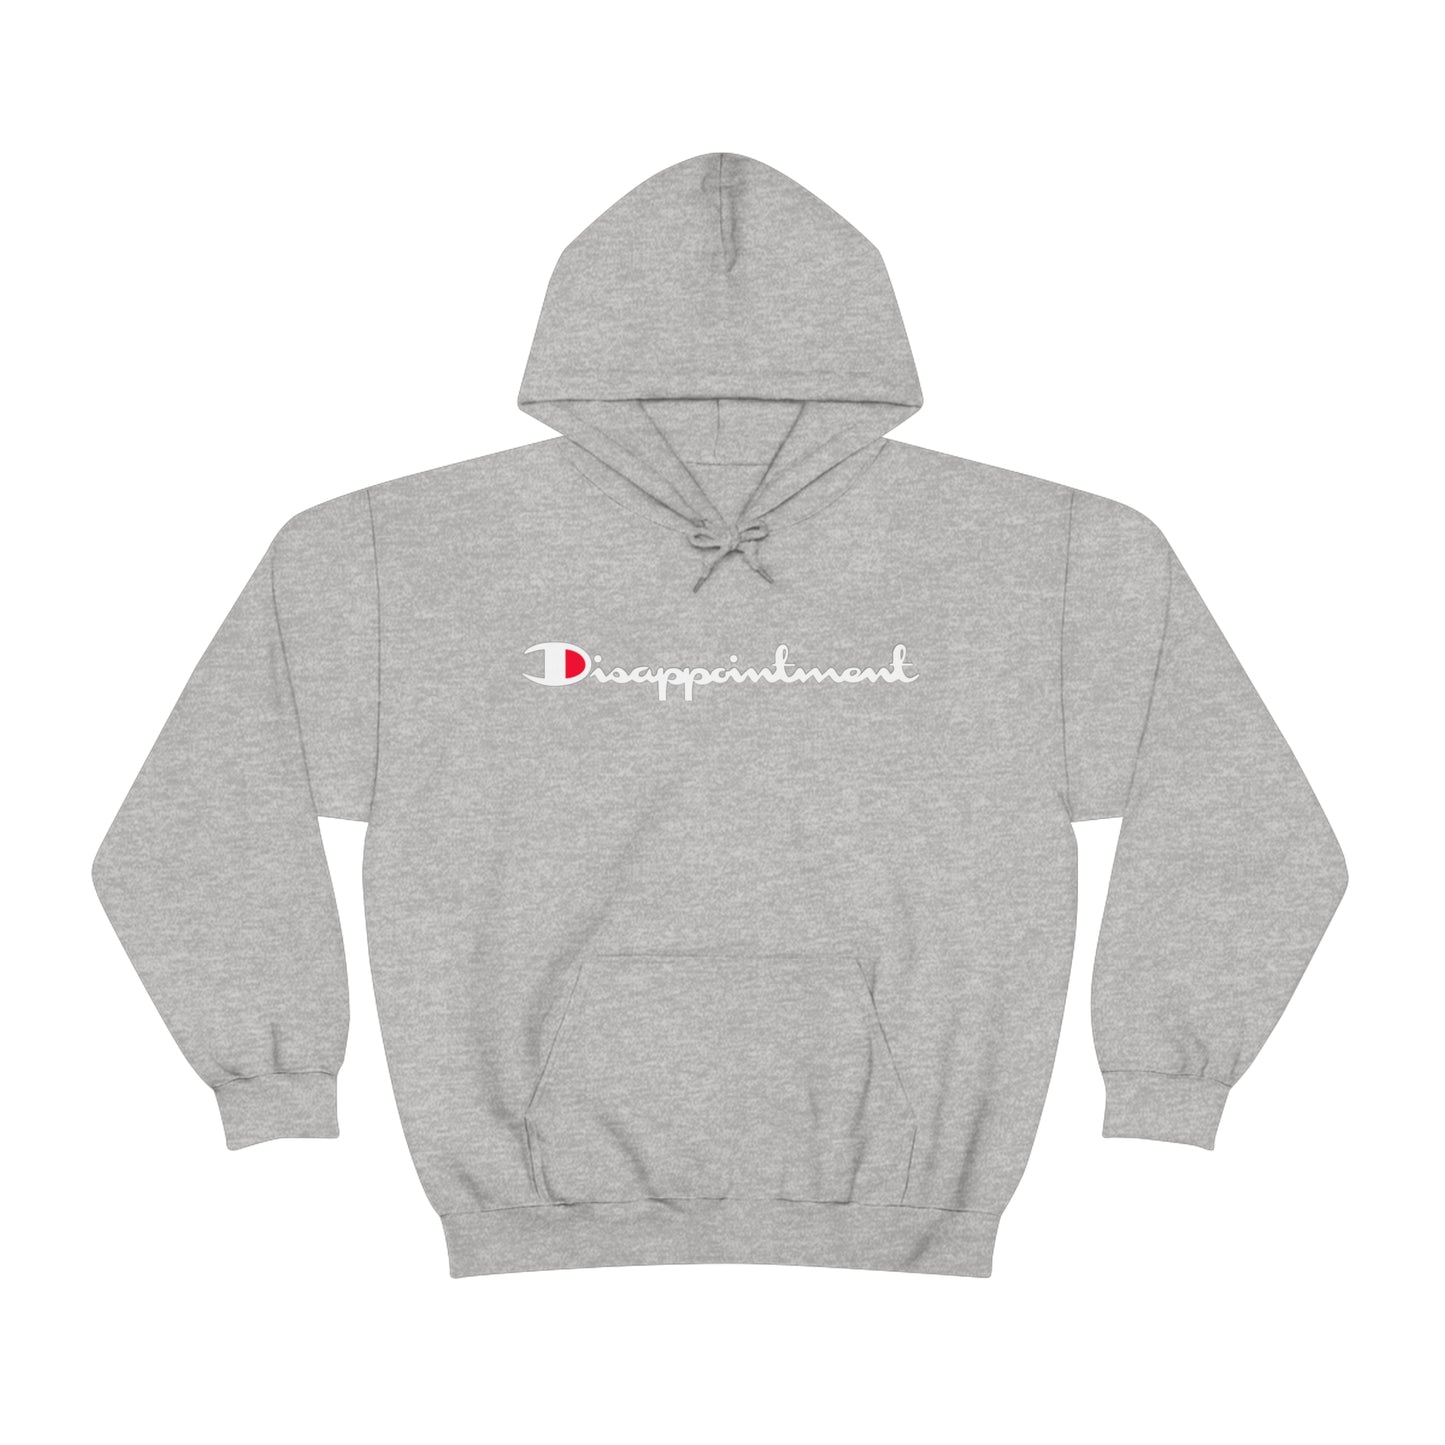 "Disappointment" Hoodie